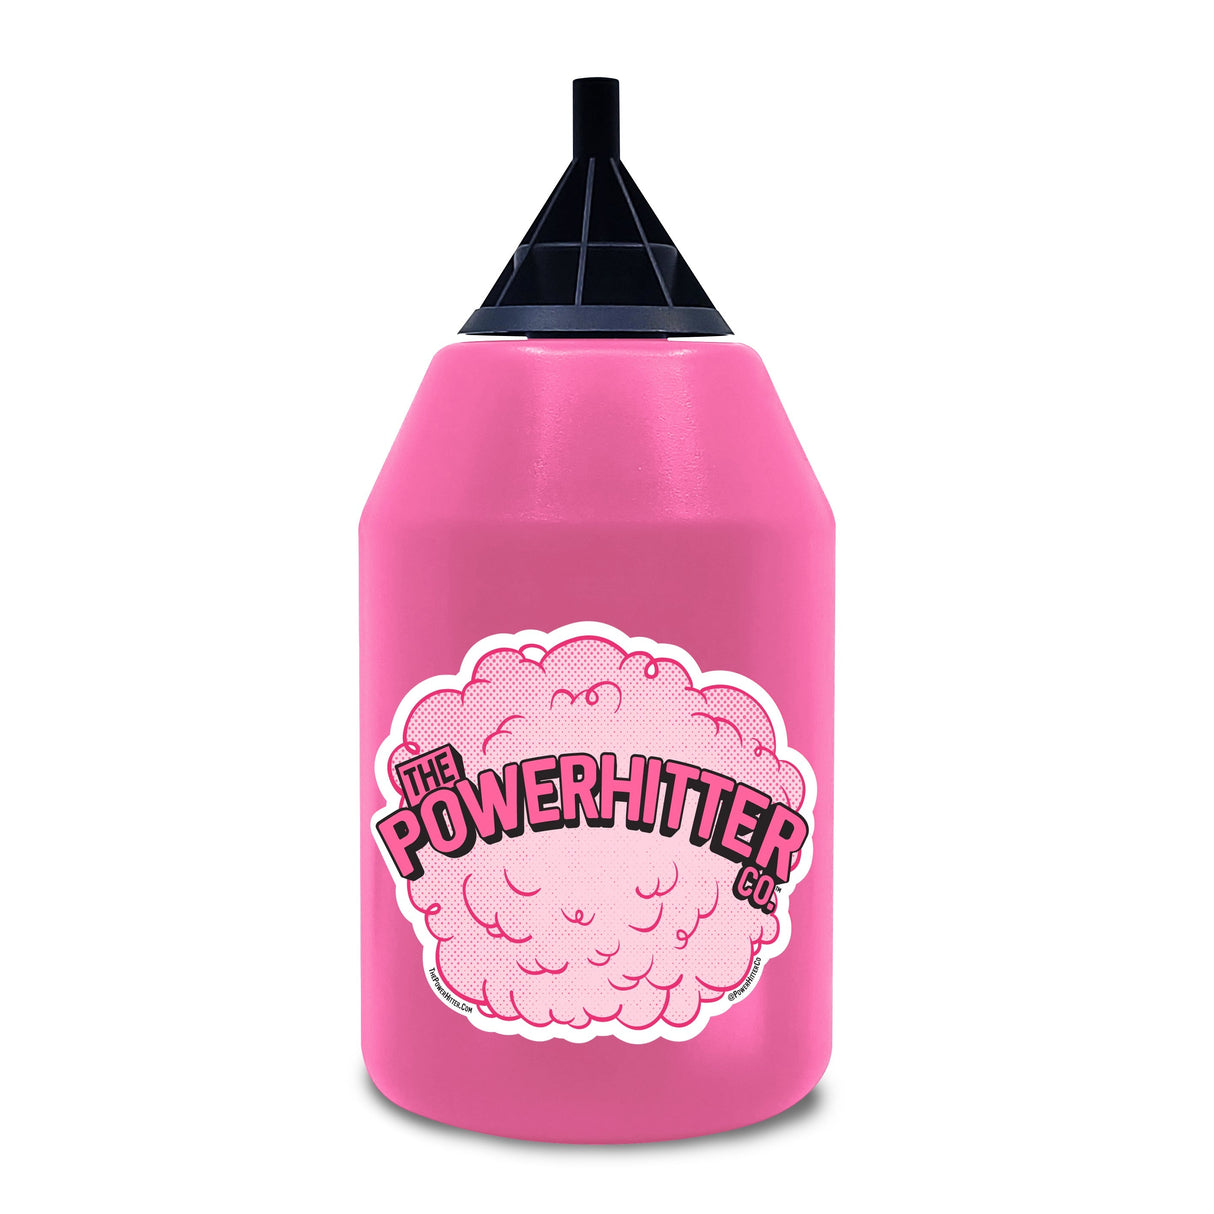 Authentic PowerHitter by The PowerHitter Co.-Pink (2 Count)